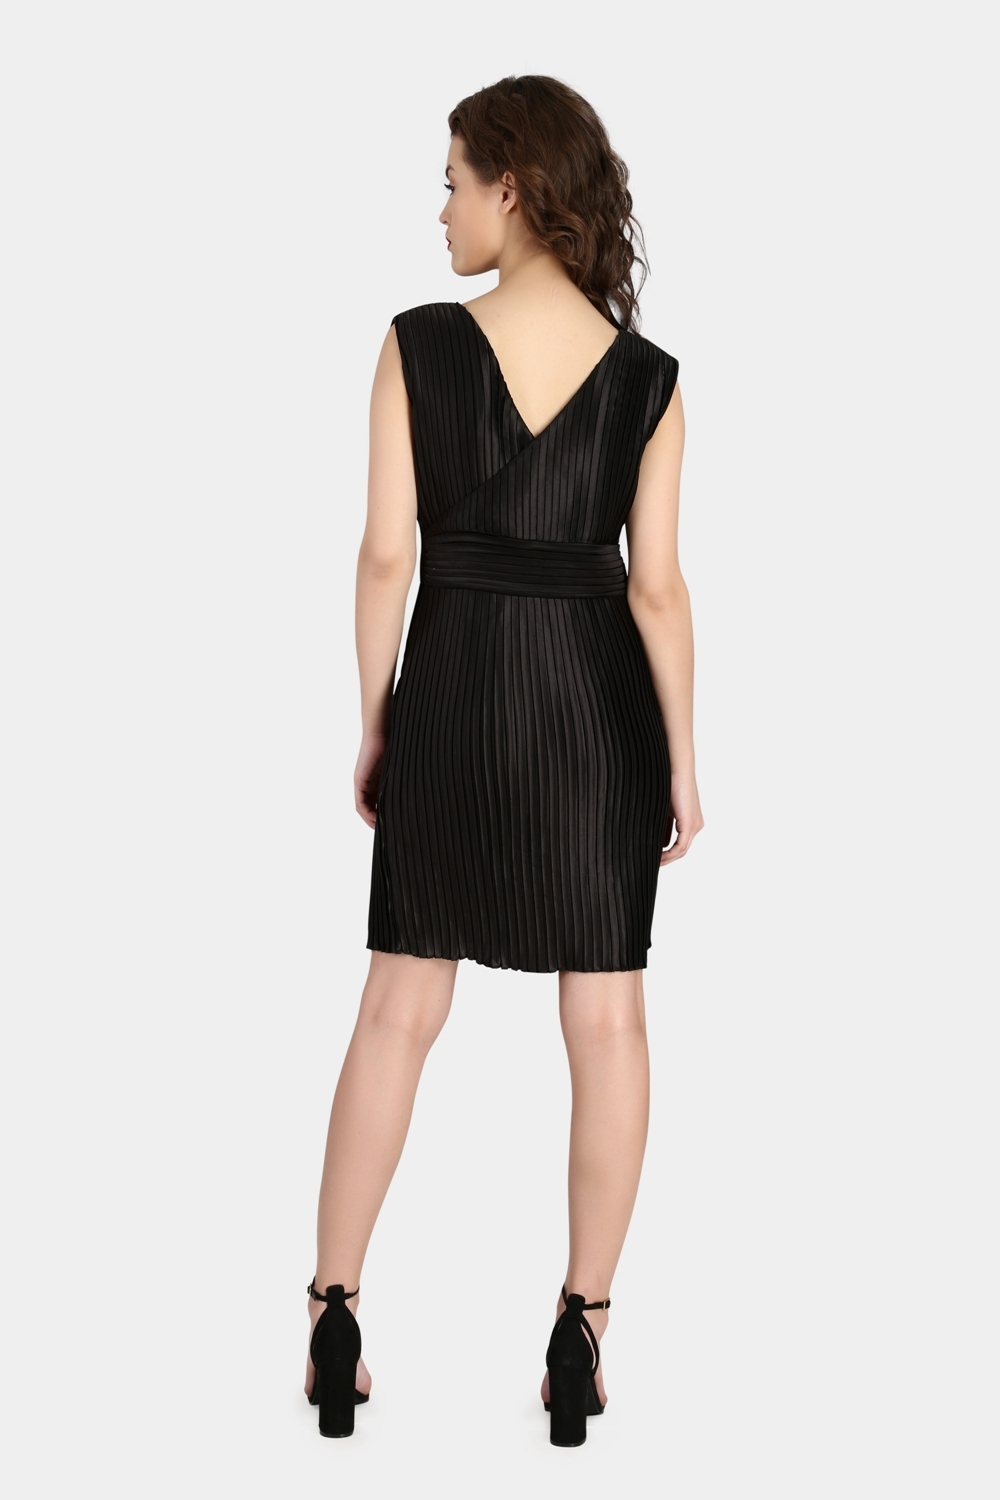 Black Pleated Party Dress - Back